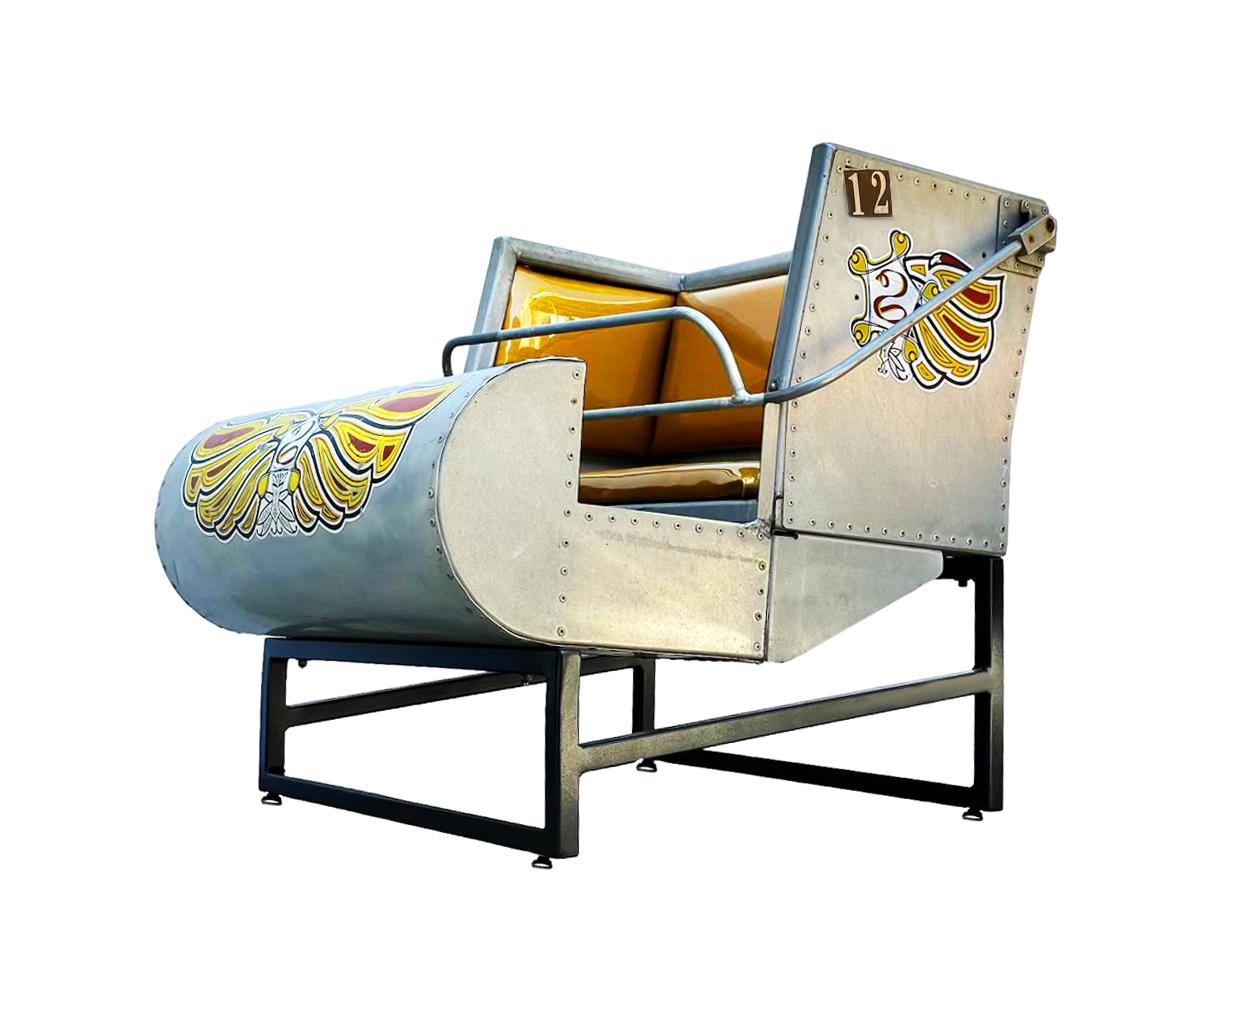 Steel Mid-Century Modern Amusement Park Ride Lounge Chair for Kids Room or Man Cave